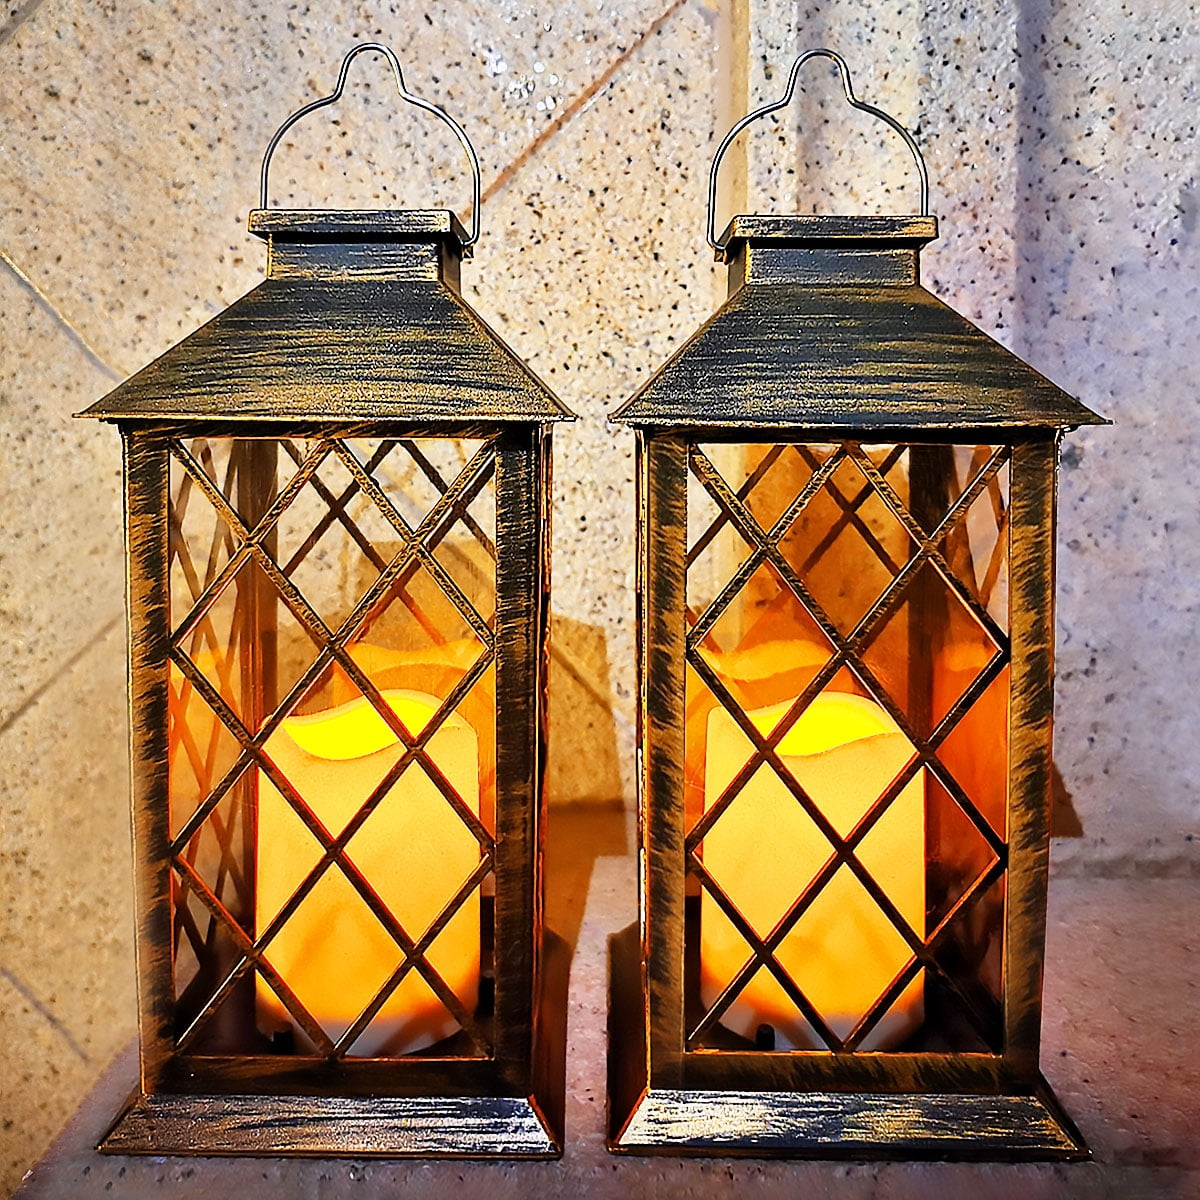 14 Set of 2 Outdoor Solar Candle Lantern Flickering Flameless LED  Candle/Plastic Hanging Solar Garden Light/Decorative Lantern For Patio  Pathway Deck